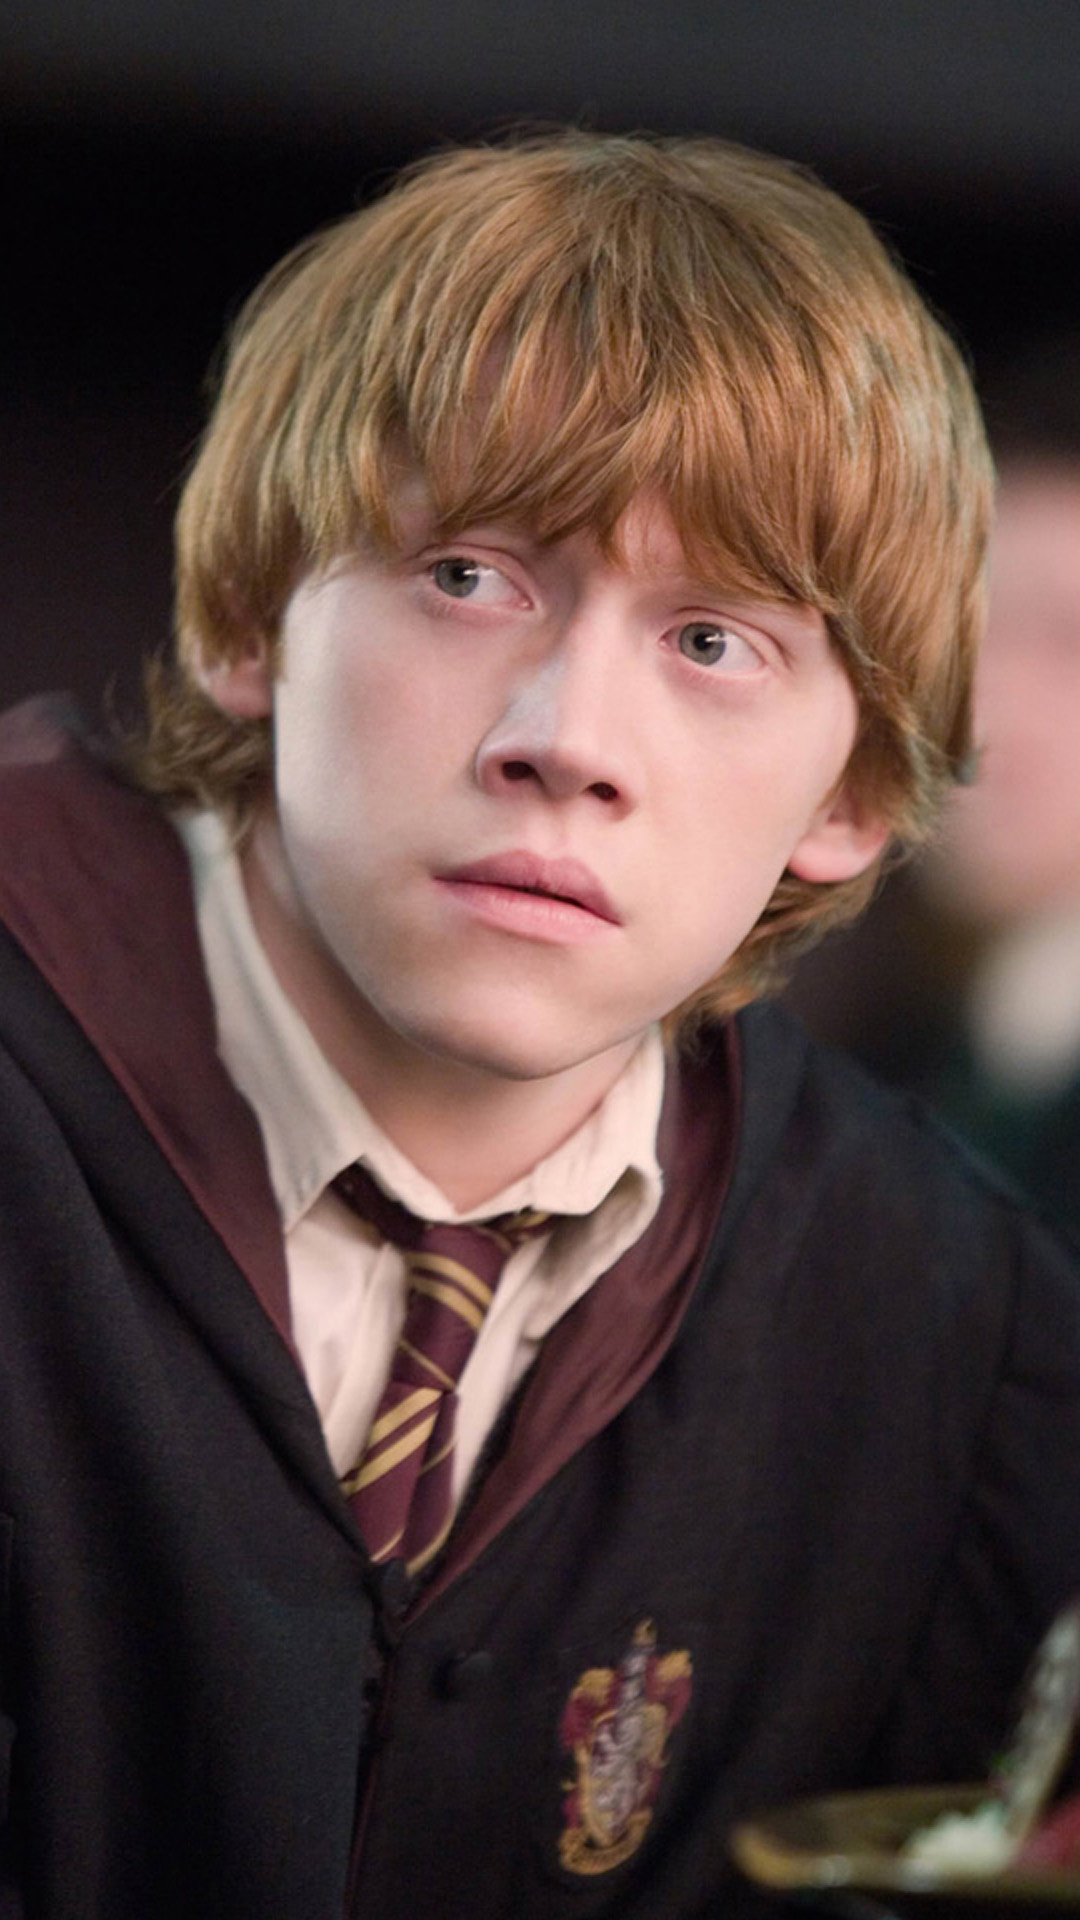 Ron Weasley, Harry Potter, iPhone wallpaper, Movie character, 1080x1920 Full HD Phone